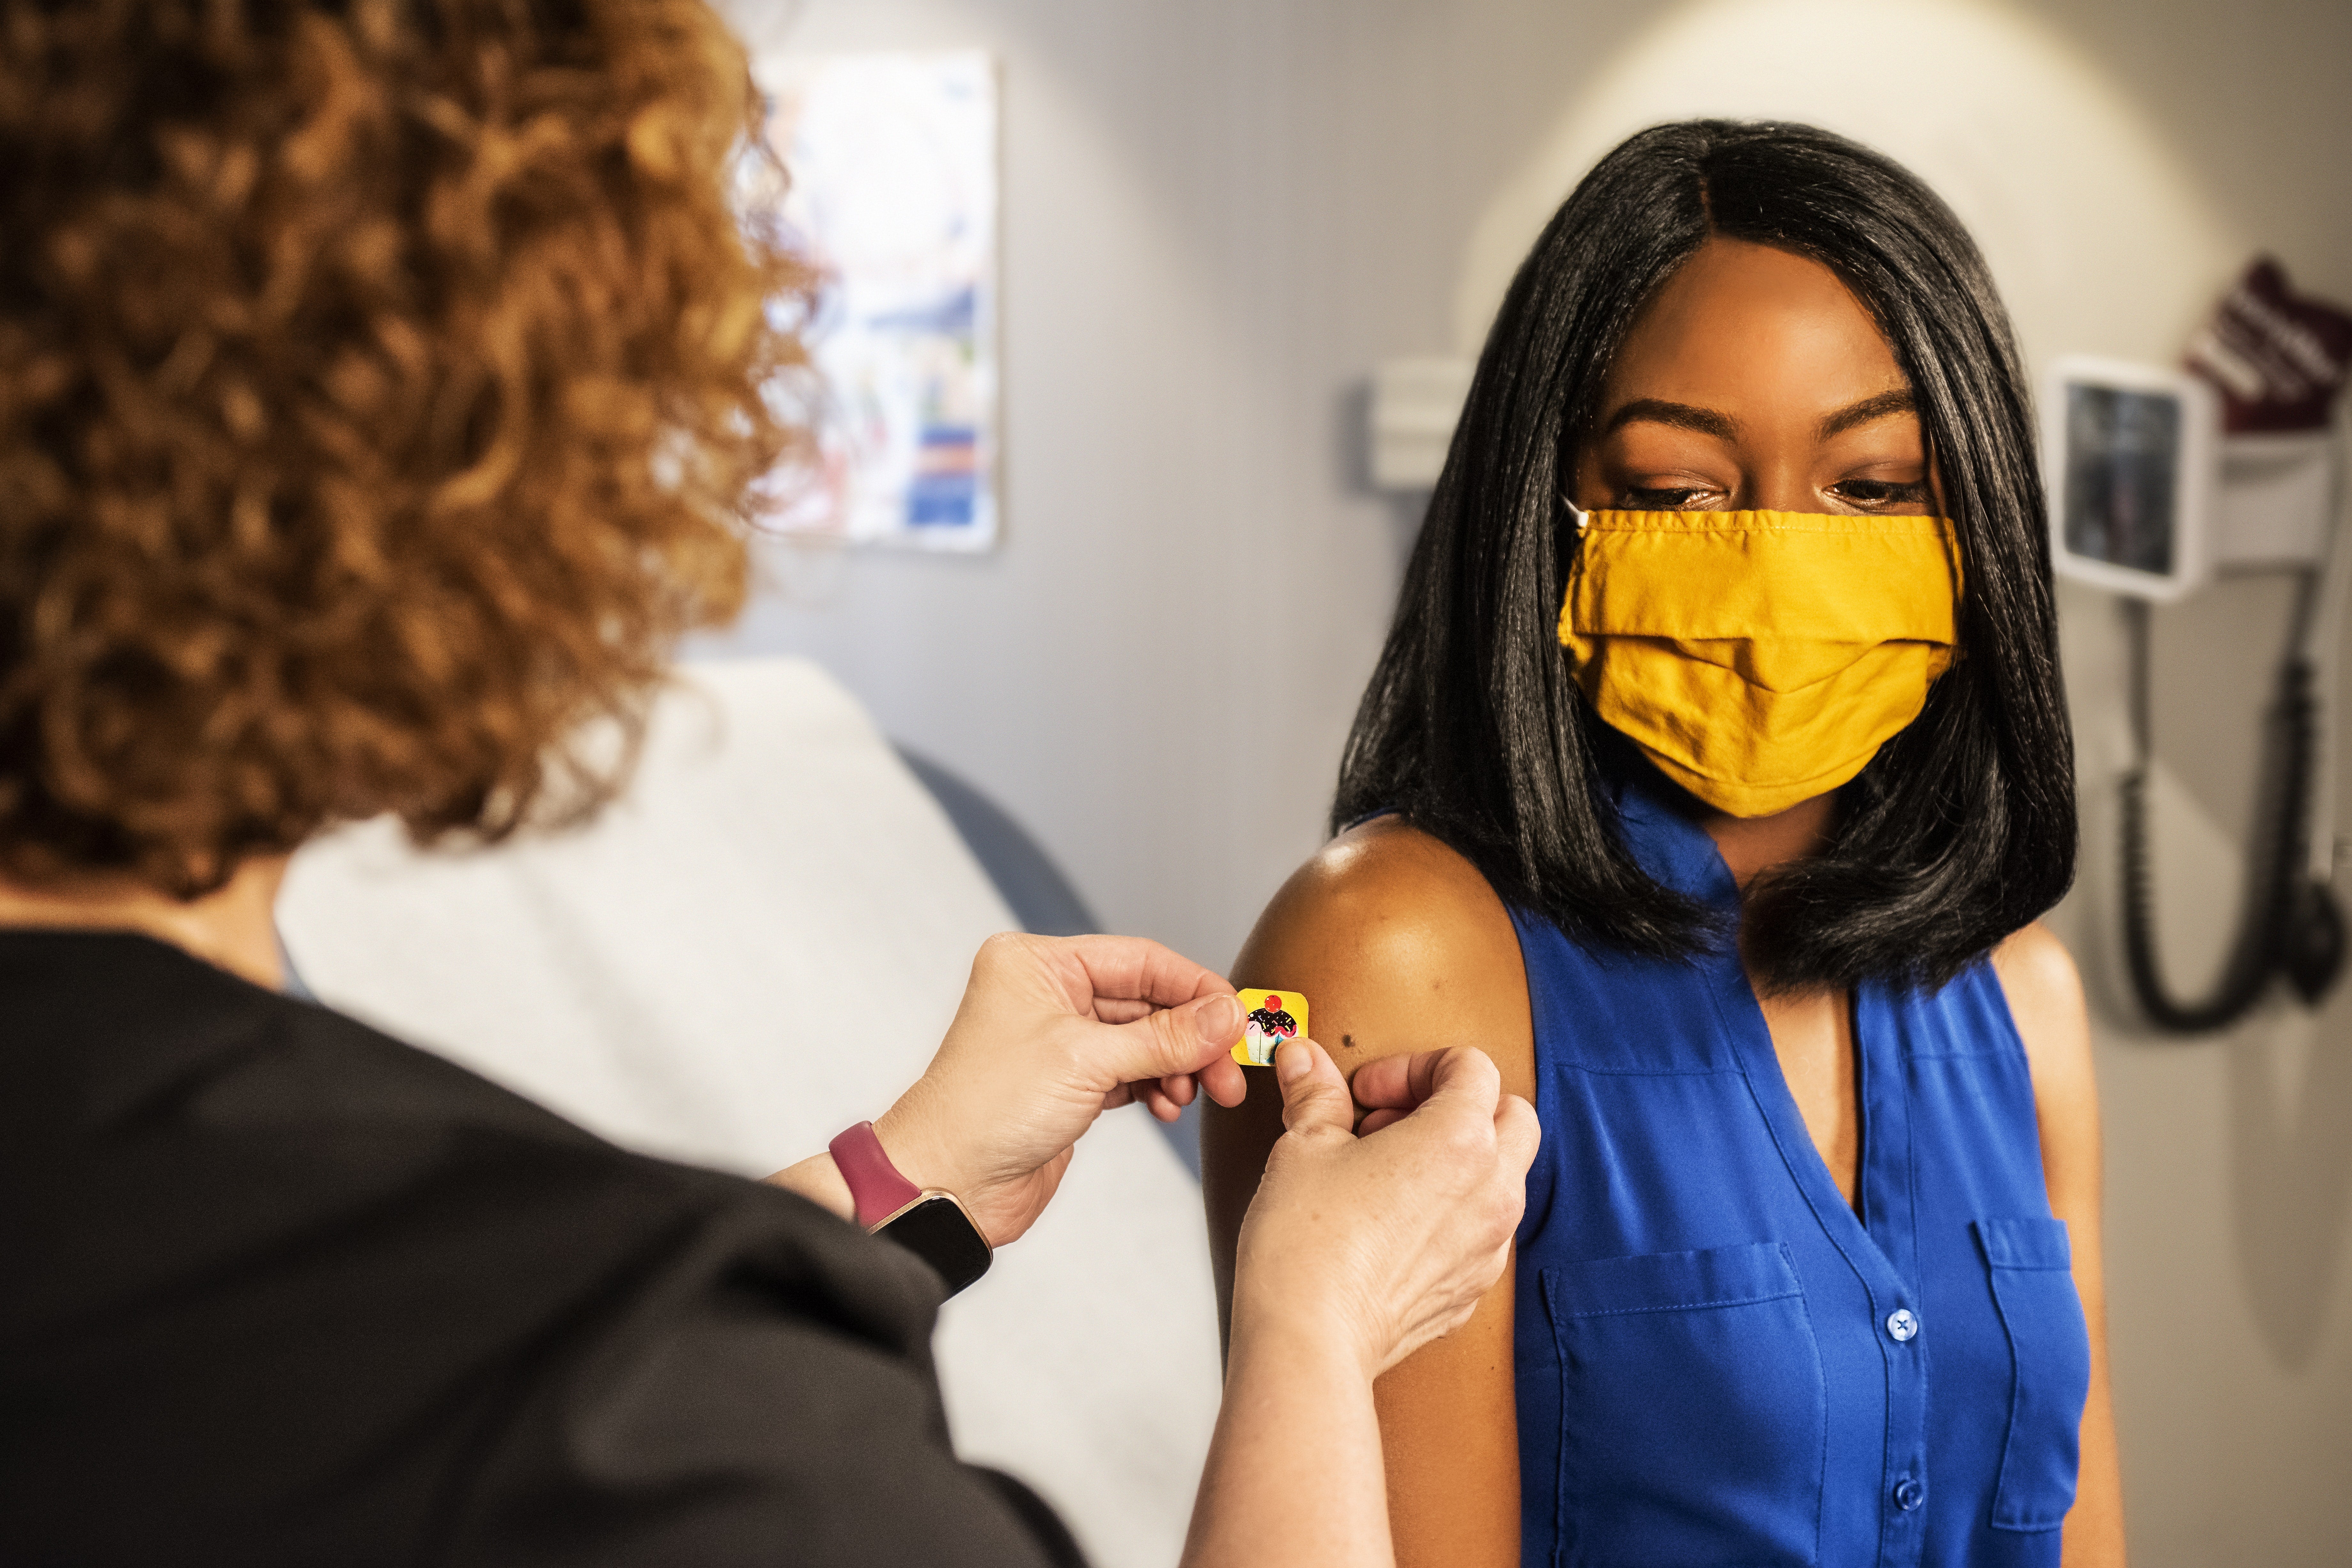 A medical worker puts a band-aid on the upper arm of a woman wearing a mask in an exam room